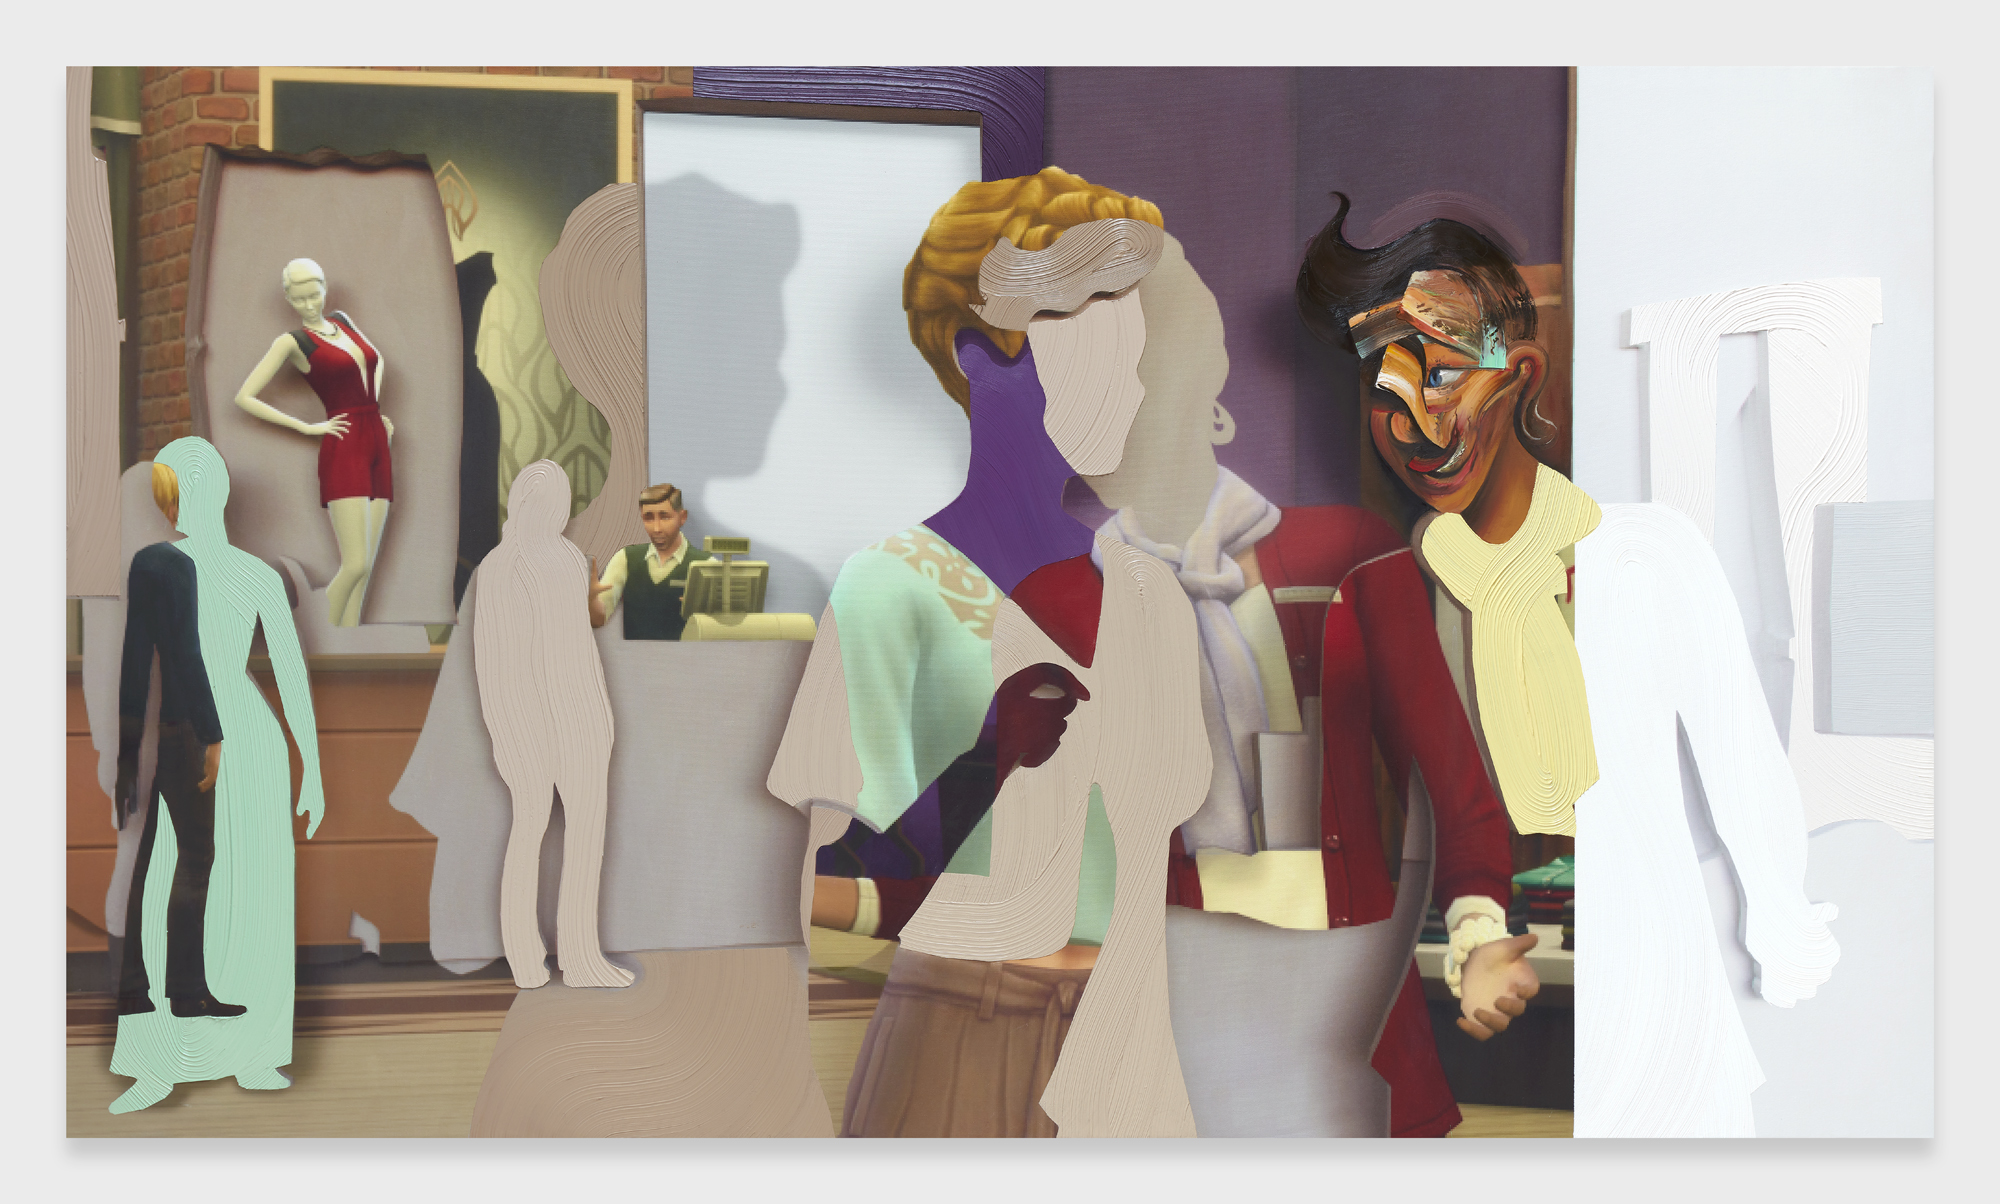 Shifted Sims #7 (Fashionista Career), 2020. All images courtesy the artist and Petzel, New York